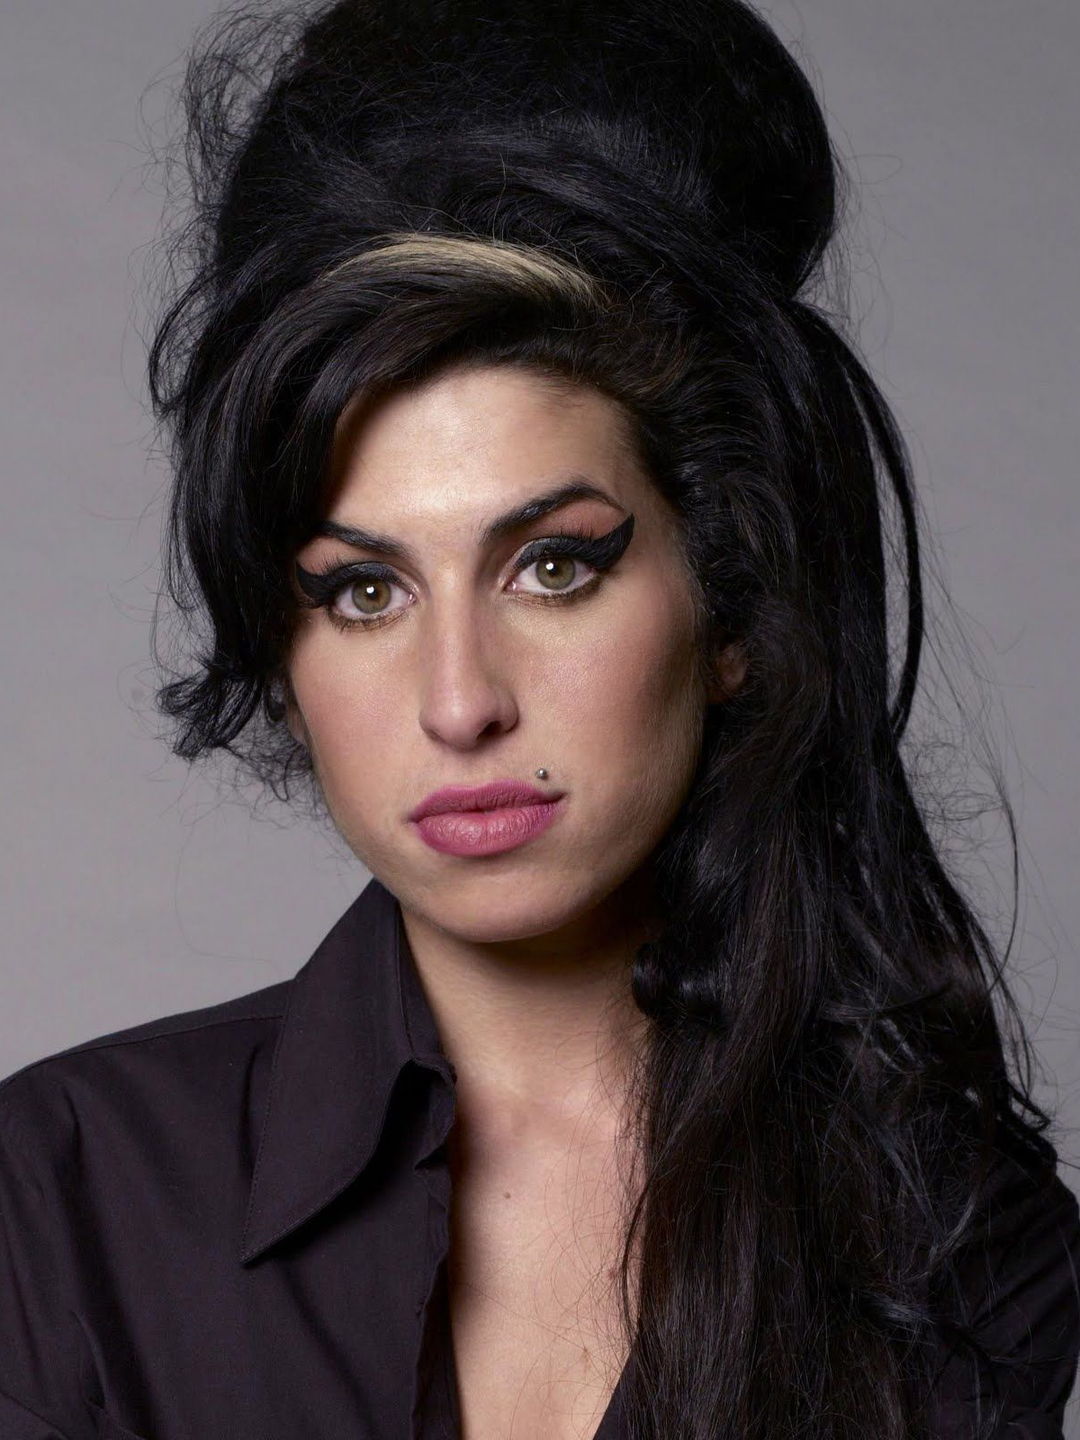 Amy Winehouse interesting facts